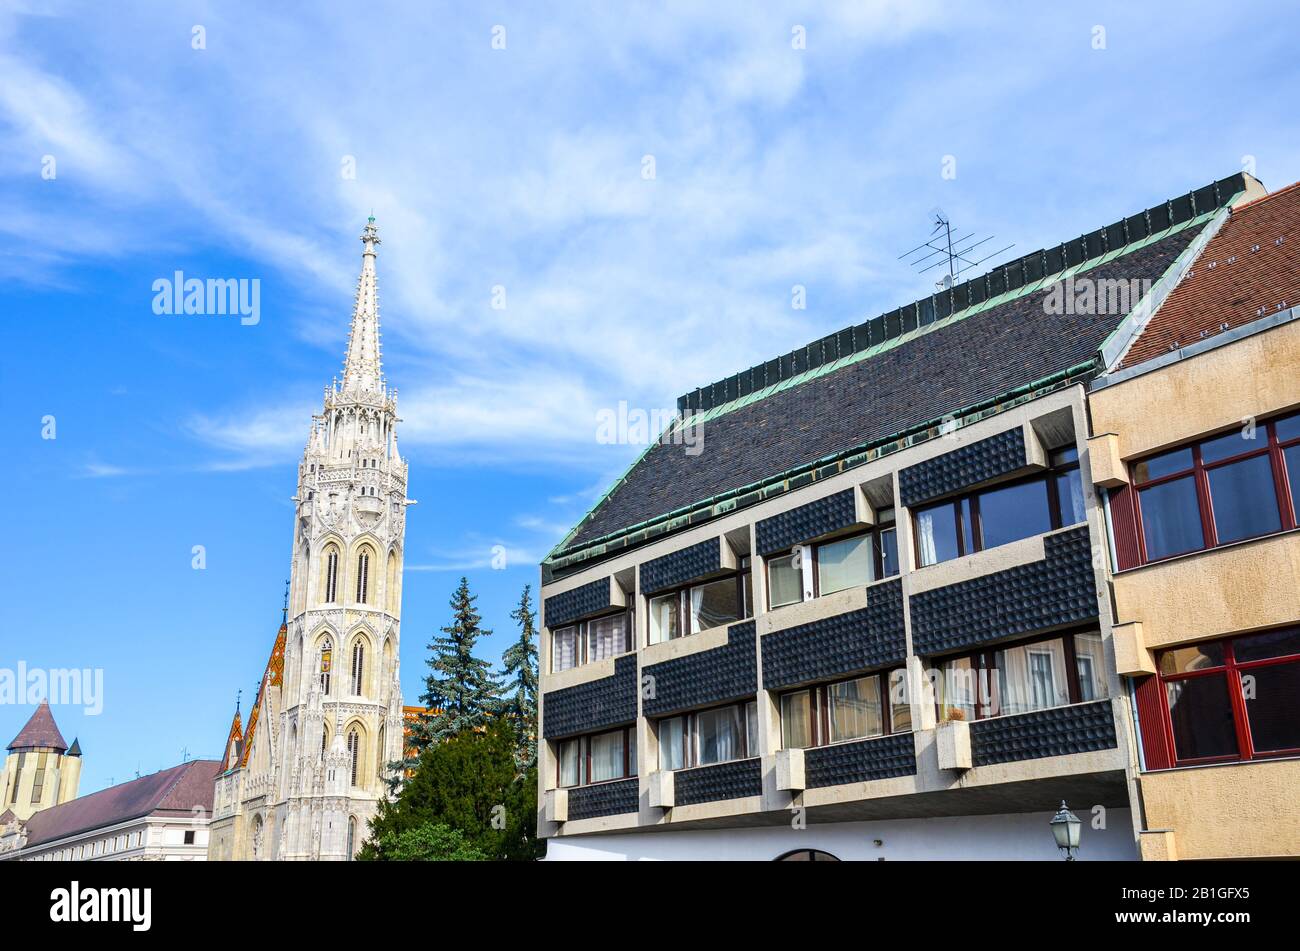 Spire of the Matthias Church in Budapest, Hungary on a horizontal photo with adjacent Socialist building. Roman Catholic church built in the Gothic style. Blue sky and white clouds. Eastern Europe. Stock Photo